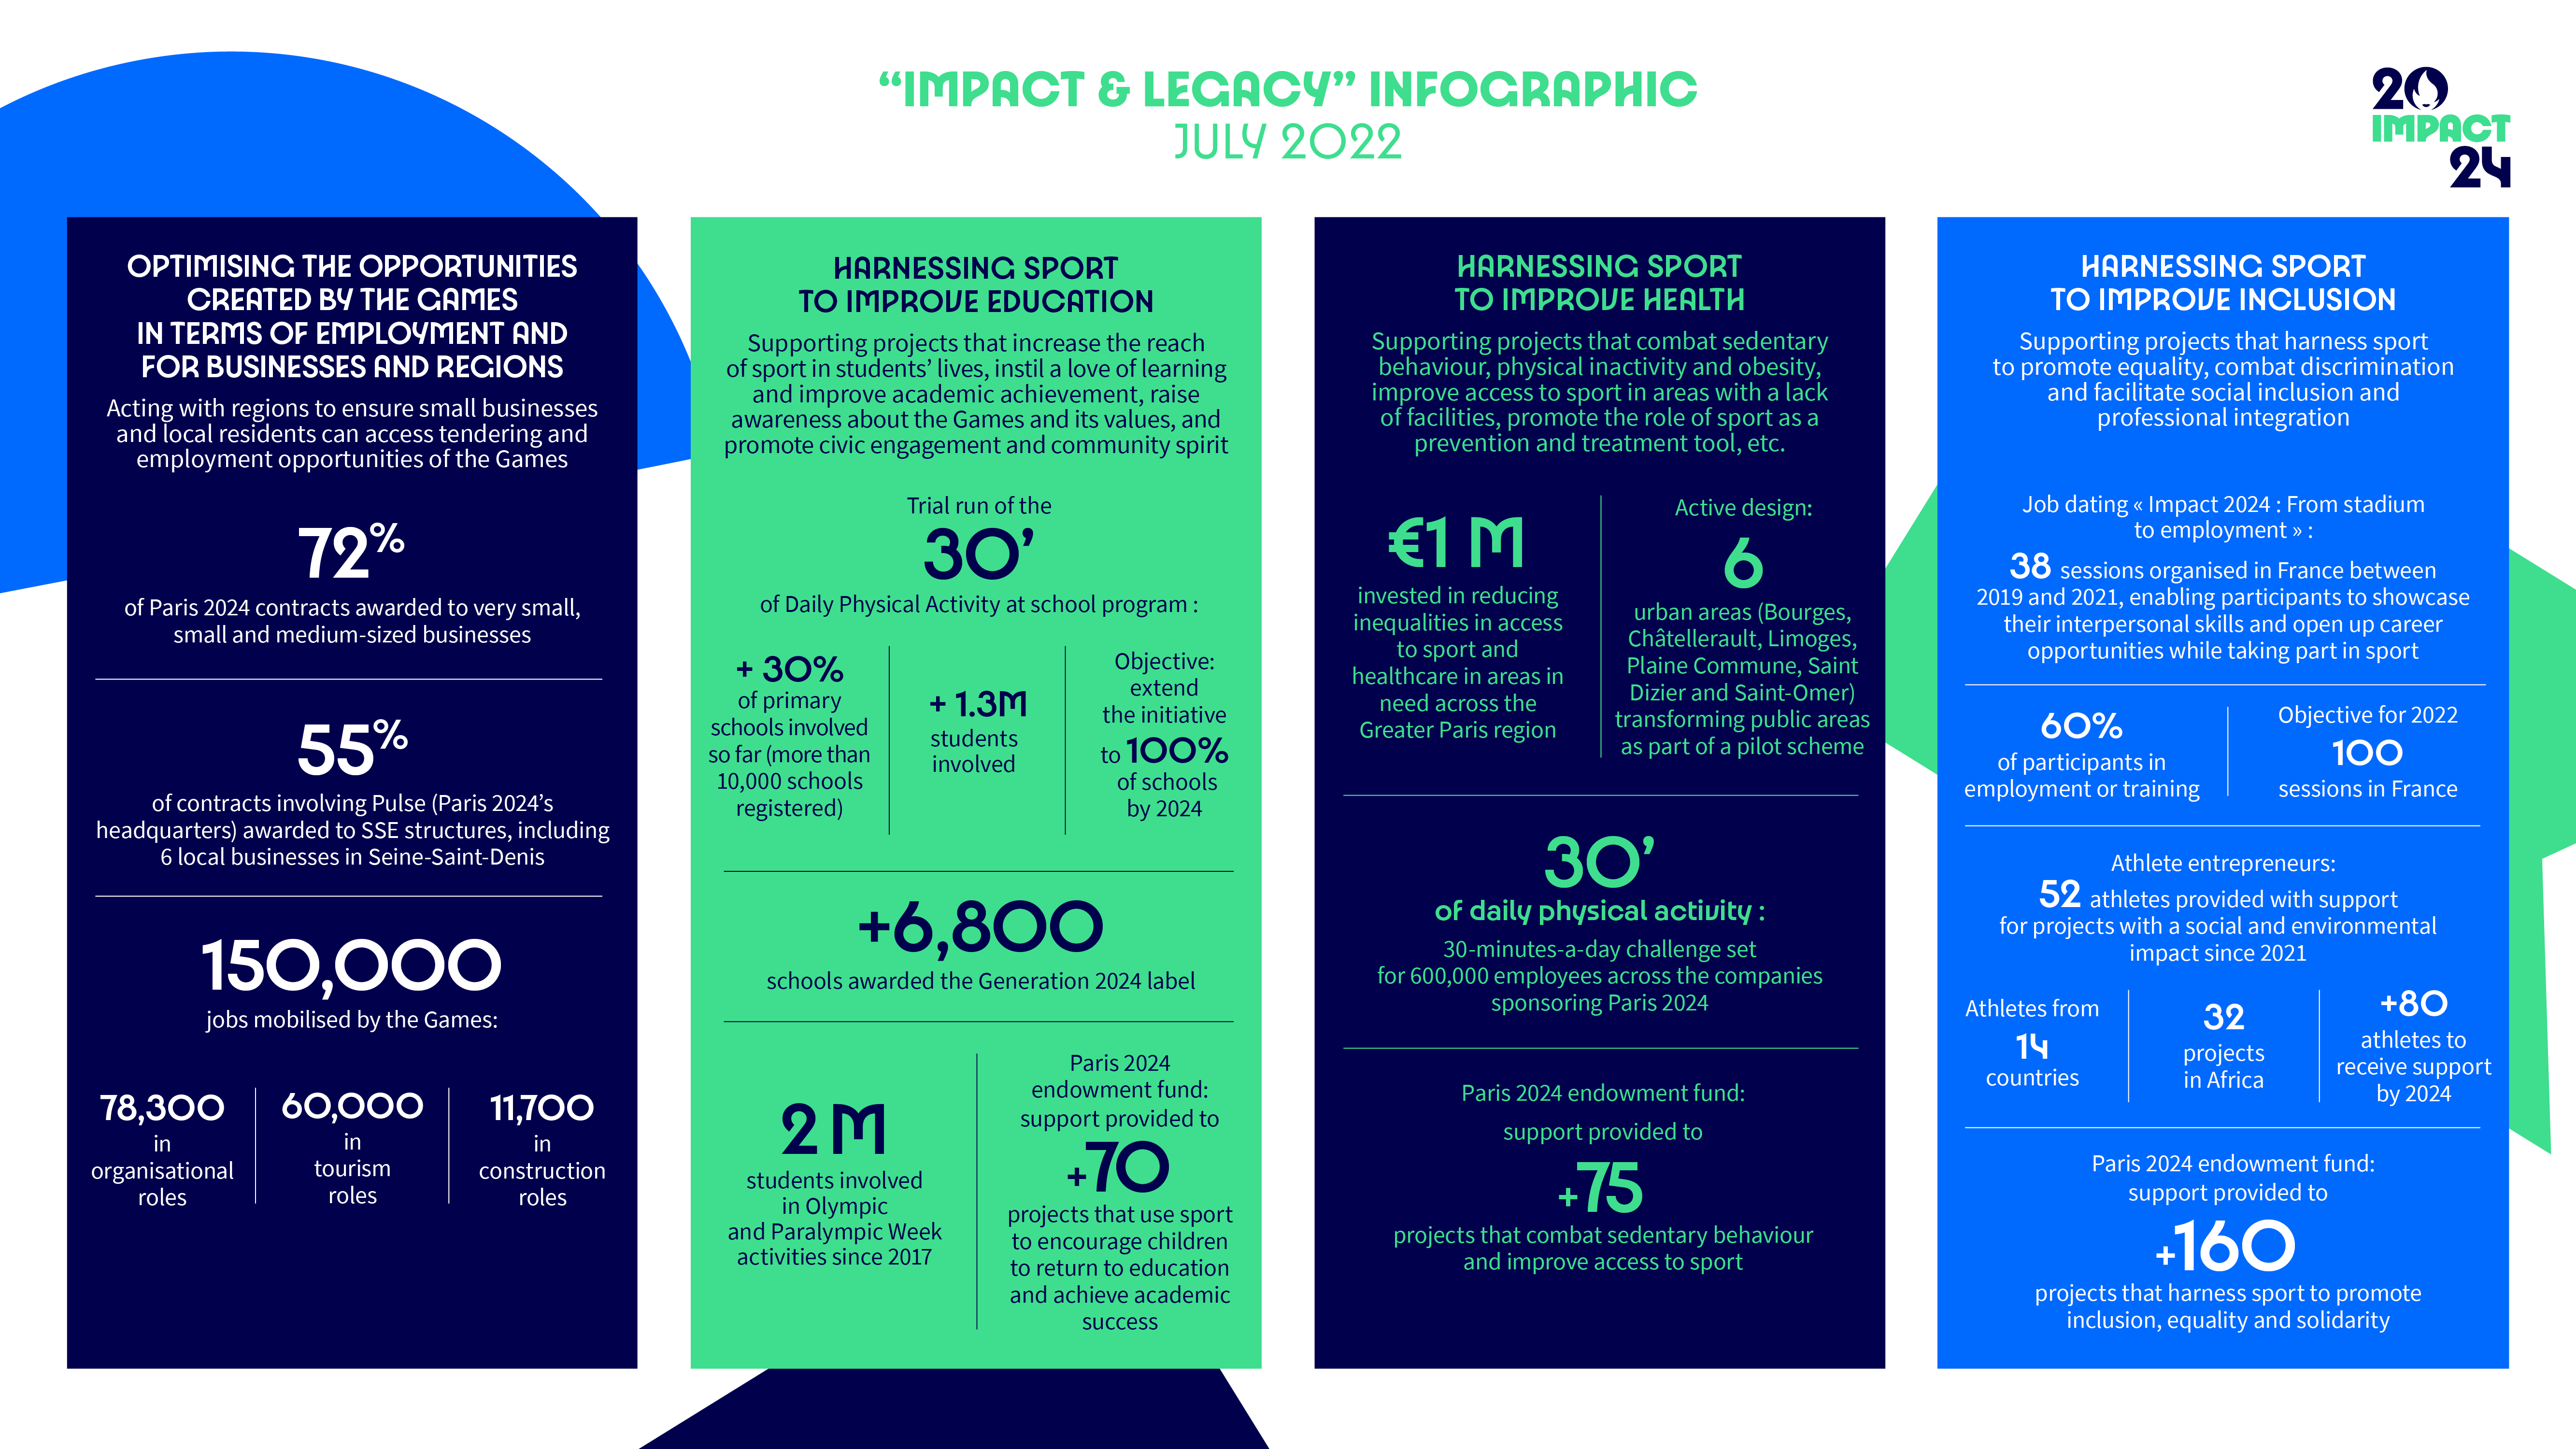 Assessing our impact in order to build the Paris 2024 legacy Paris 2024